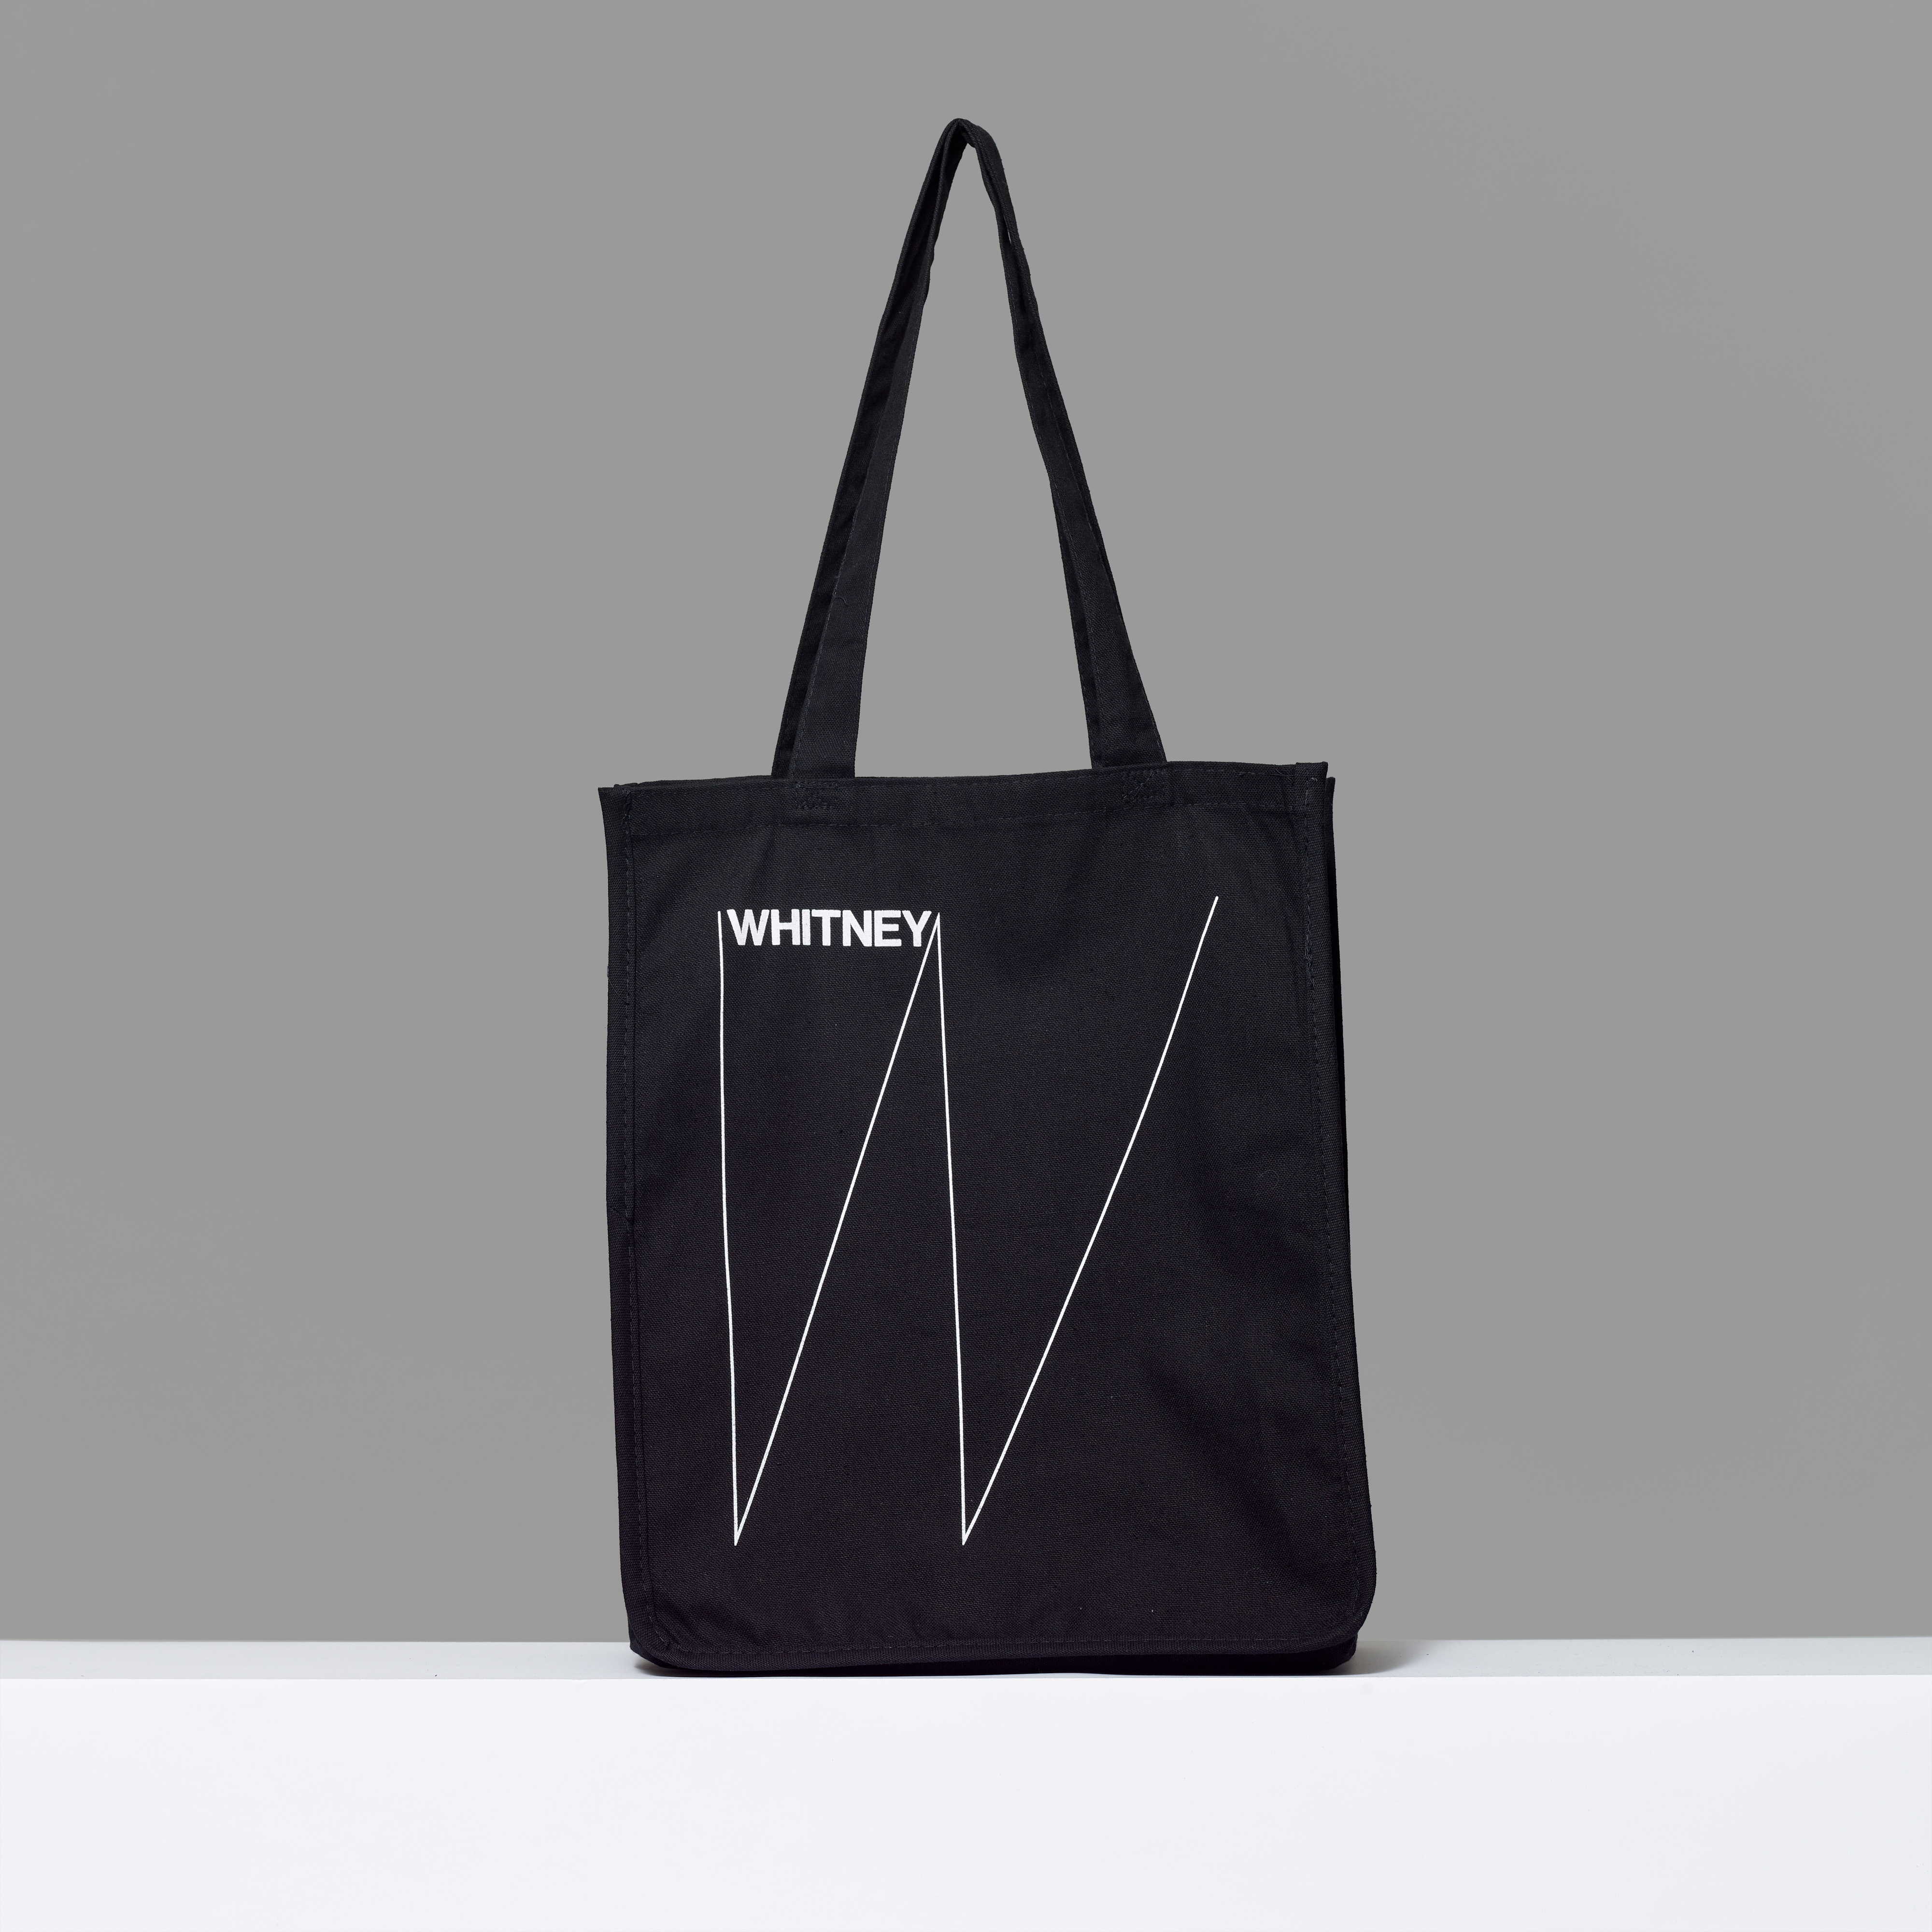 100% cotton black tote featuring Whitney logo in white text. 15" H x 14.25" L x 5" W.